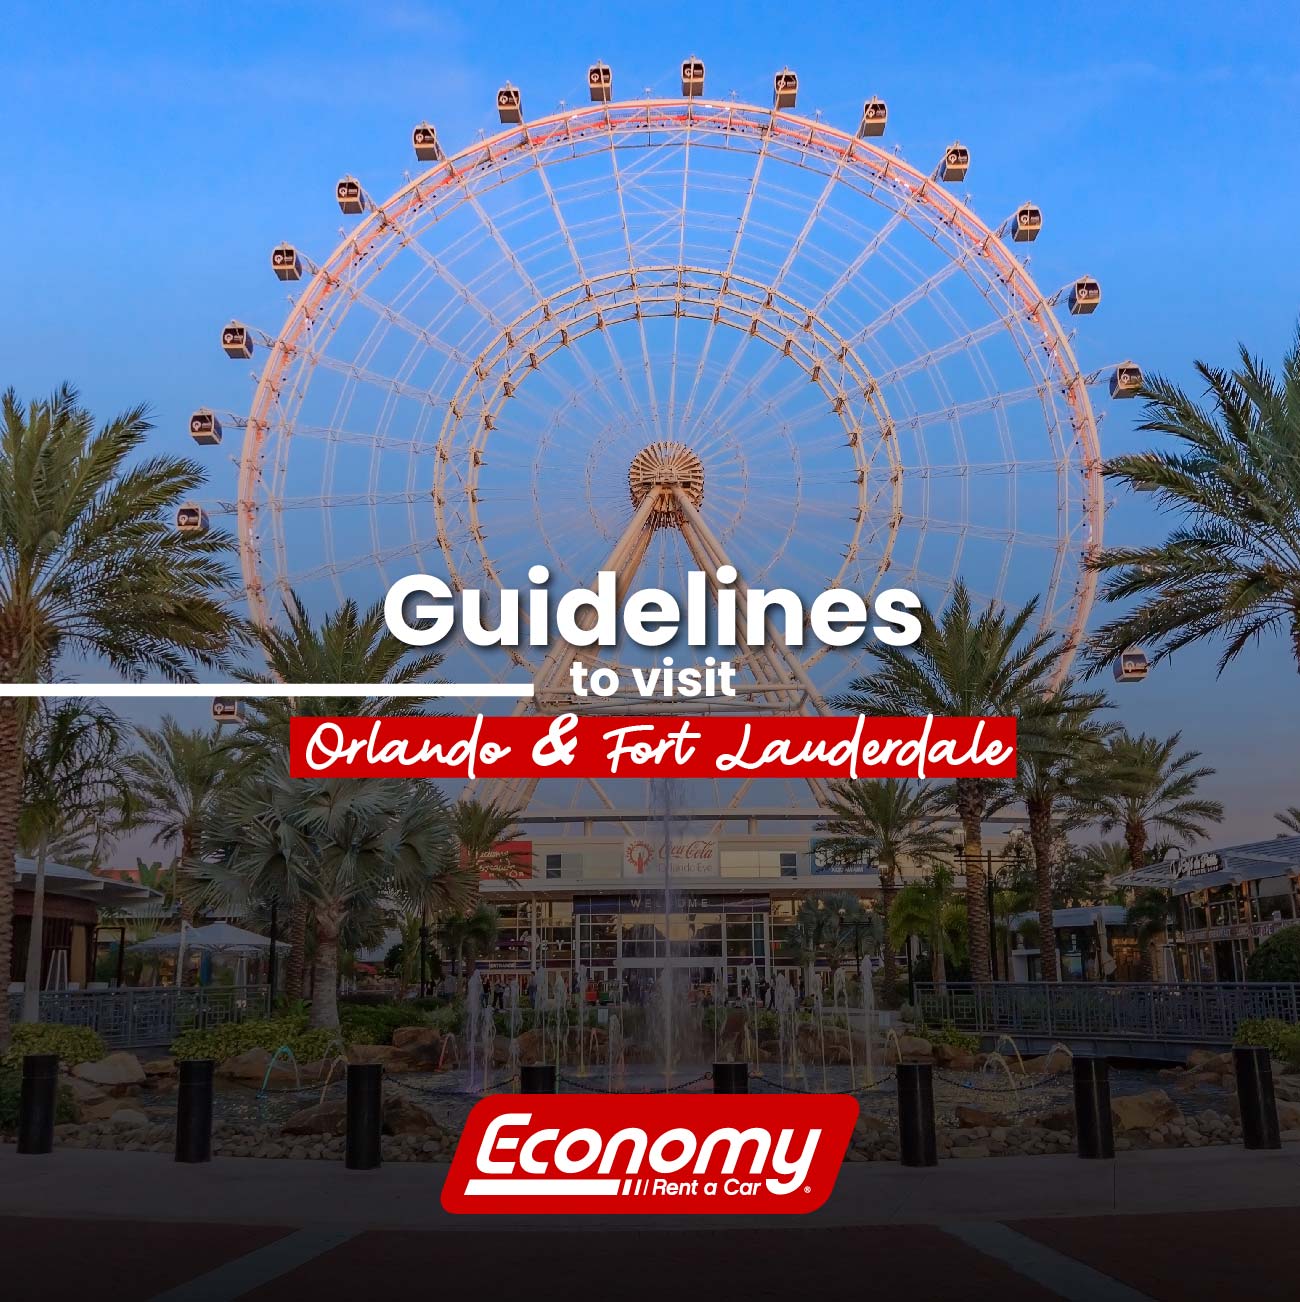 Guidelines to visit Orlando and Florida